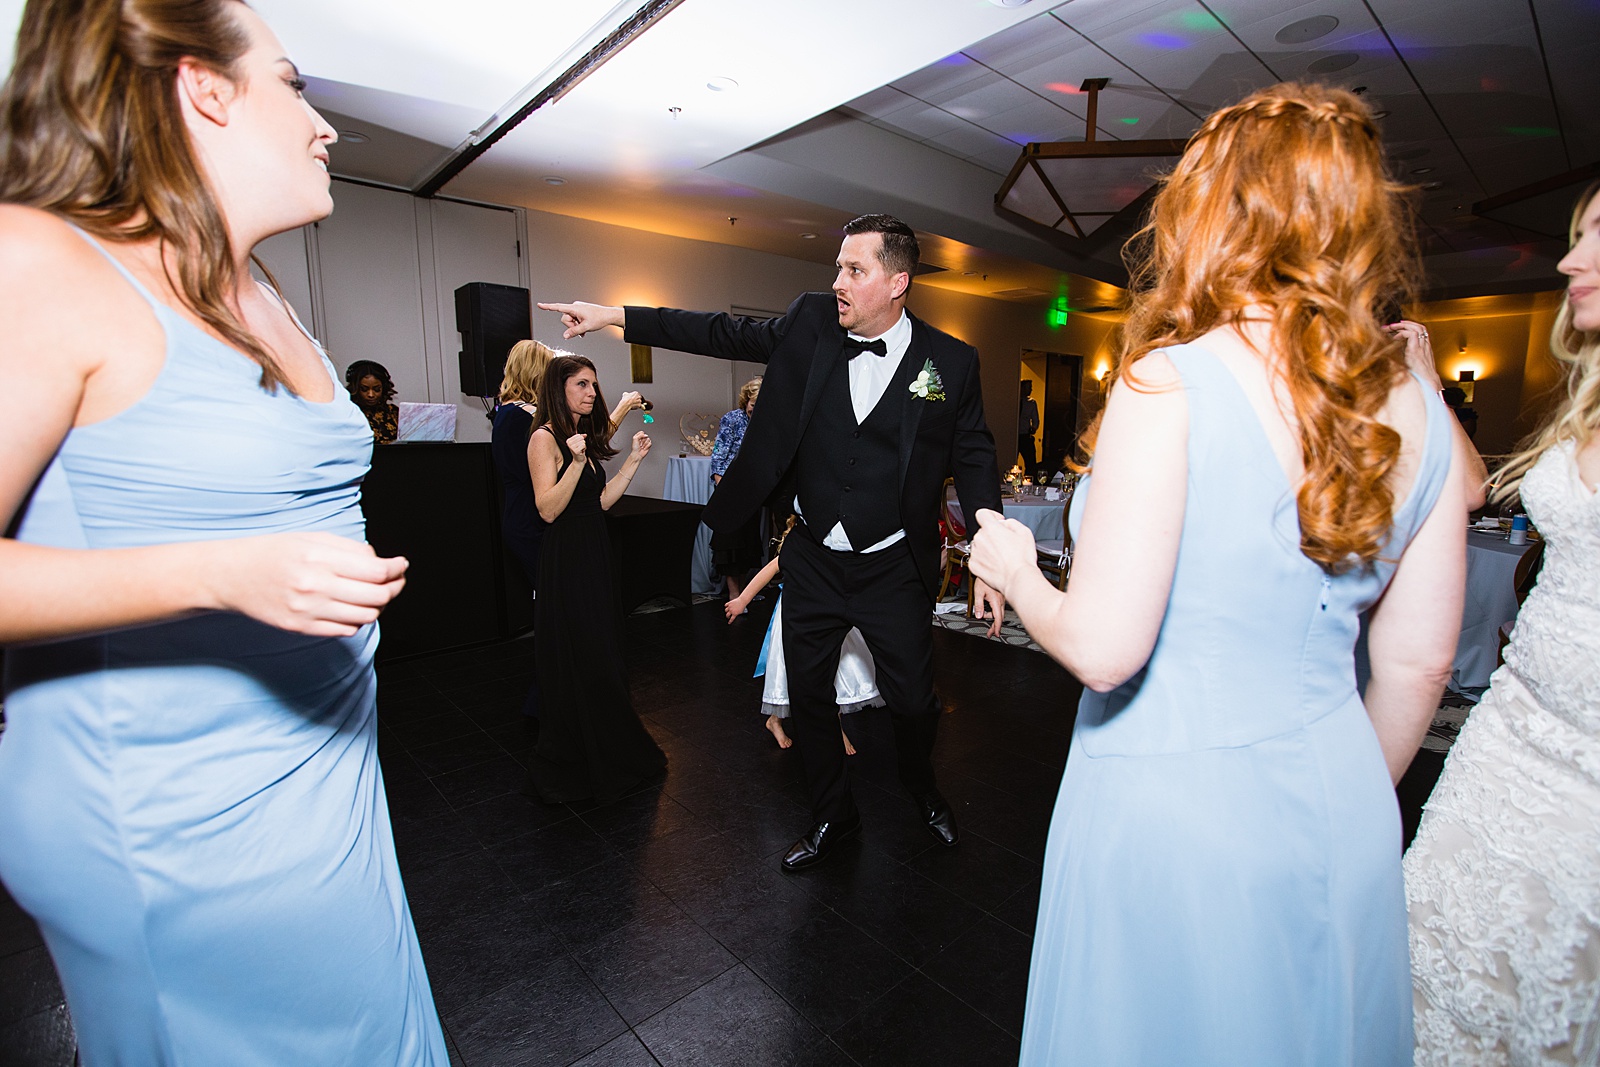 Groom dancing with guests at Troon North wedding reception by Scottsdale wedding photographer PMA Photography